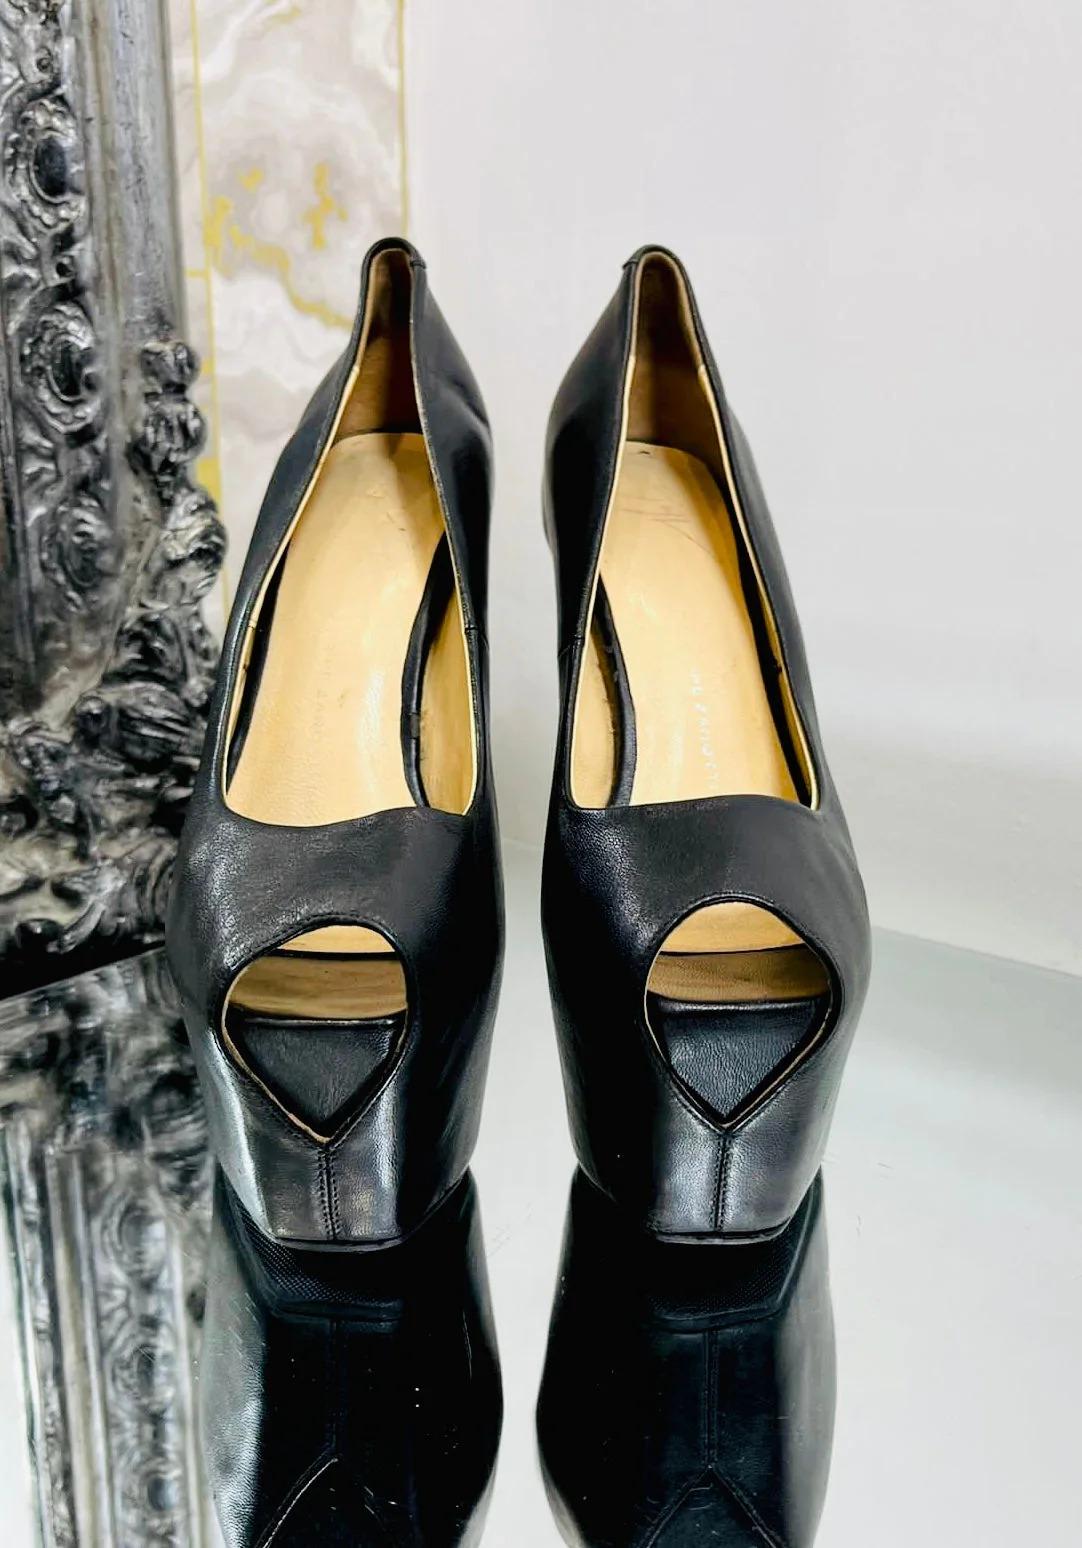 Giuseppe Zanotti Peep Toe Platform Heels

Black leather, with square fronts to the peep toes and very high heel.

Additional information:
Size – 35
Composition- Leather
Condition – Good ( Some signs of wear)
Comes With -  Shoes Only 